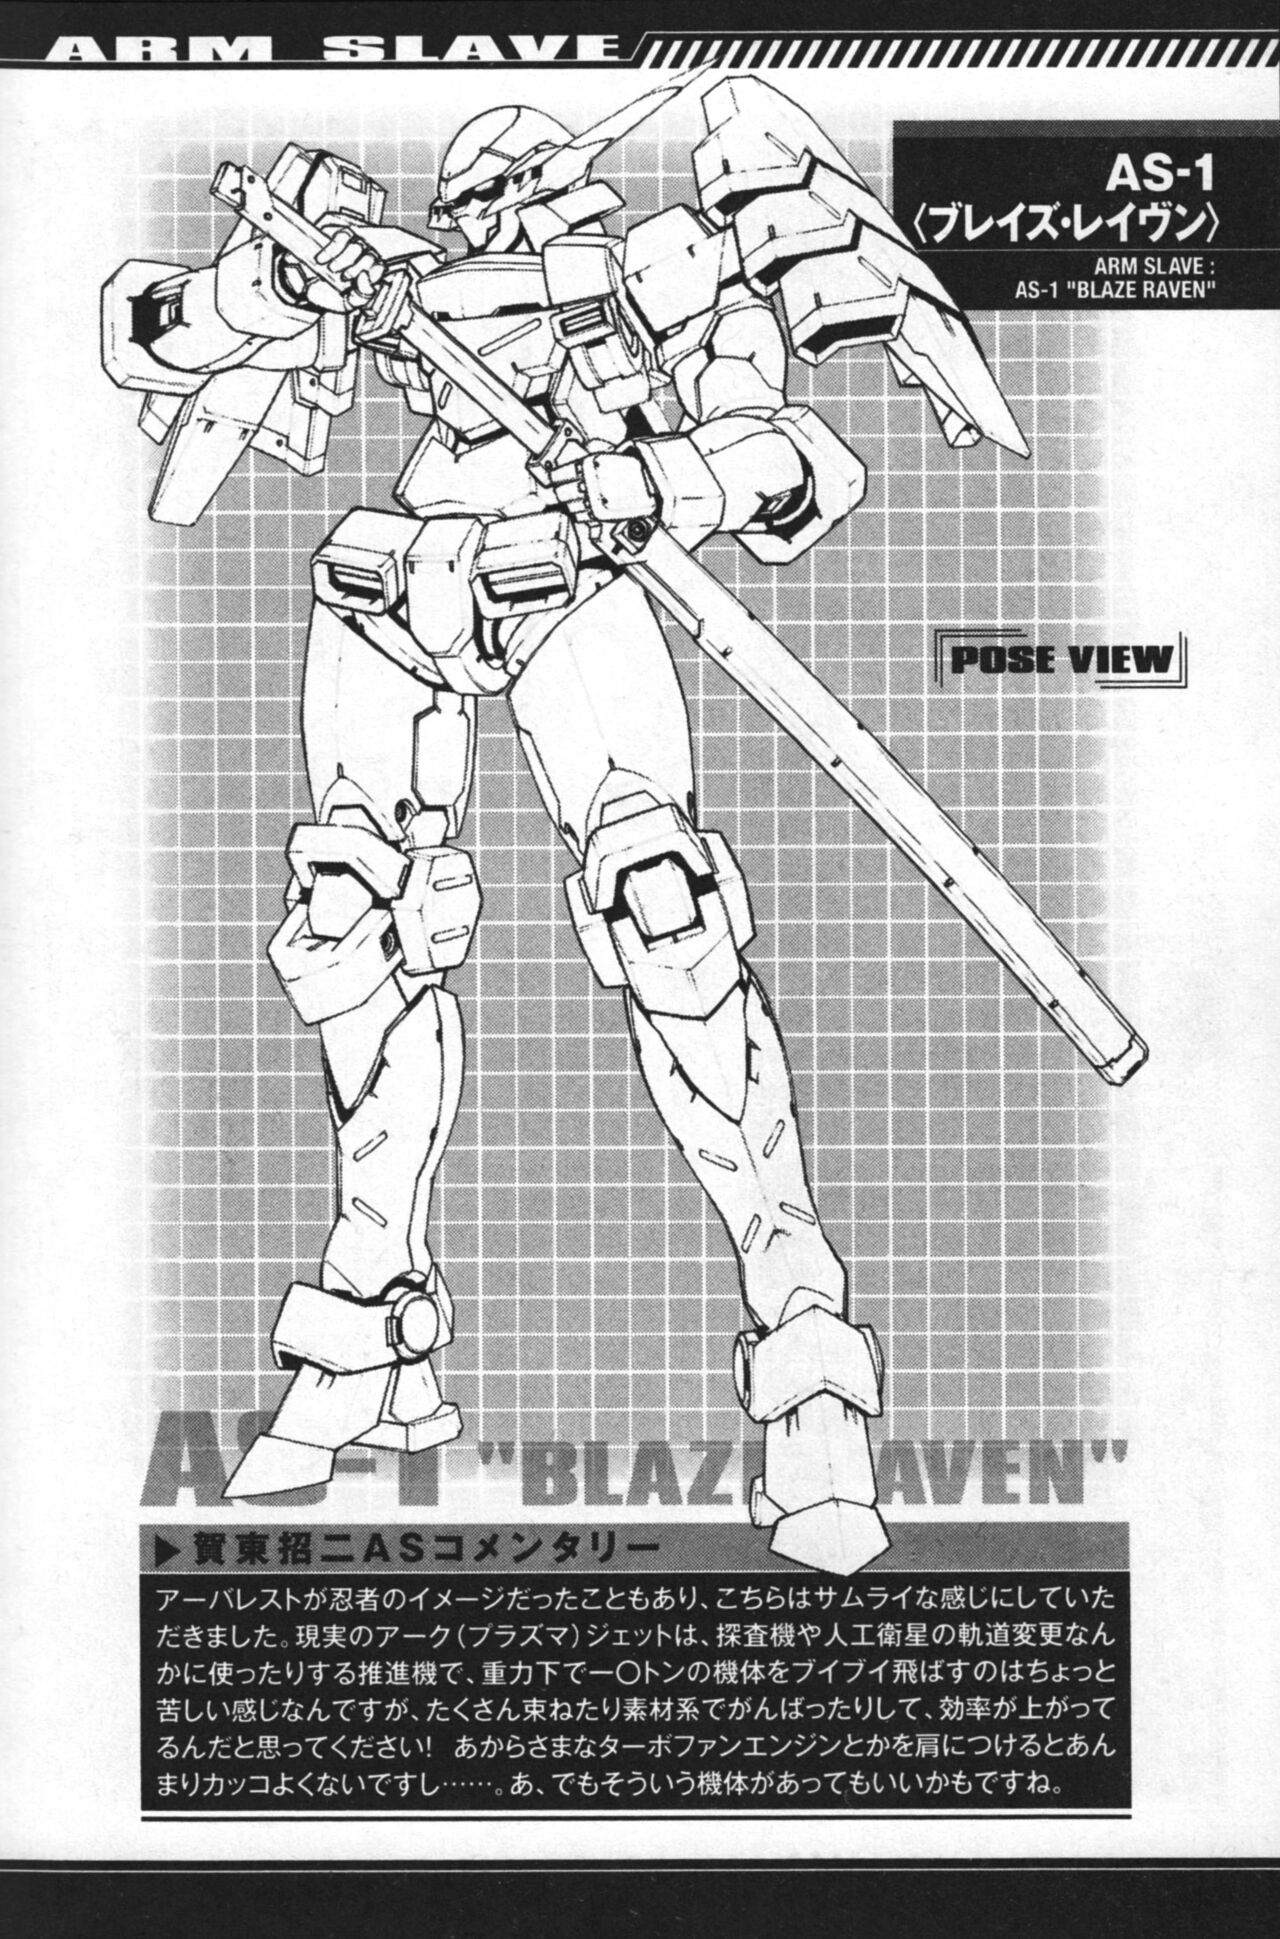 Full Metal Panic! Another Mechanical Archive (Incomplete) - 全一卷(1/3) - 5